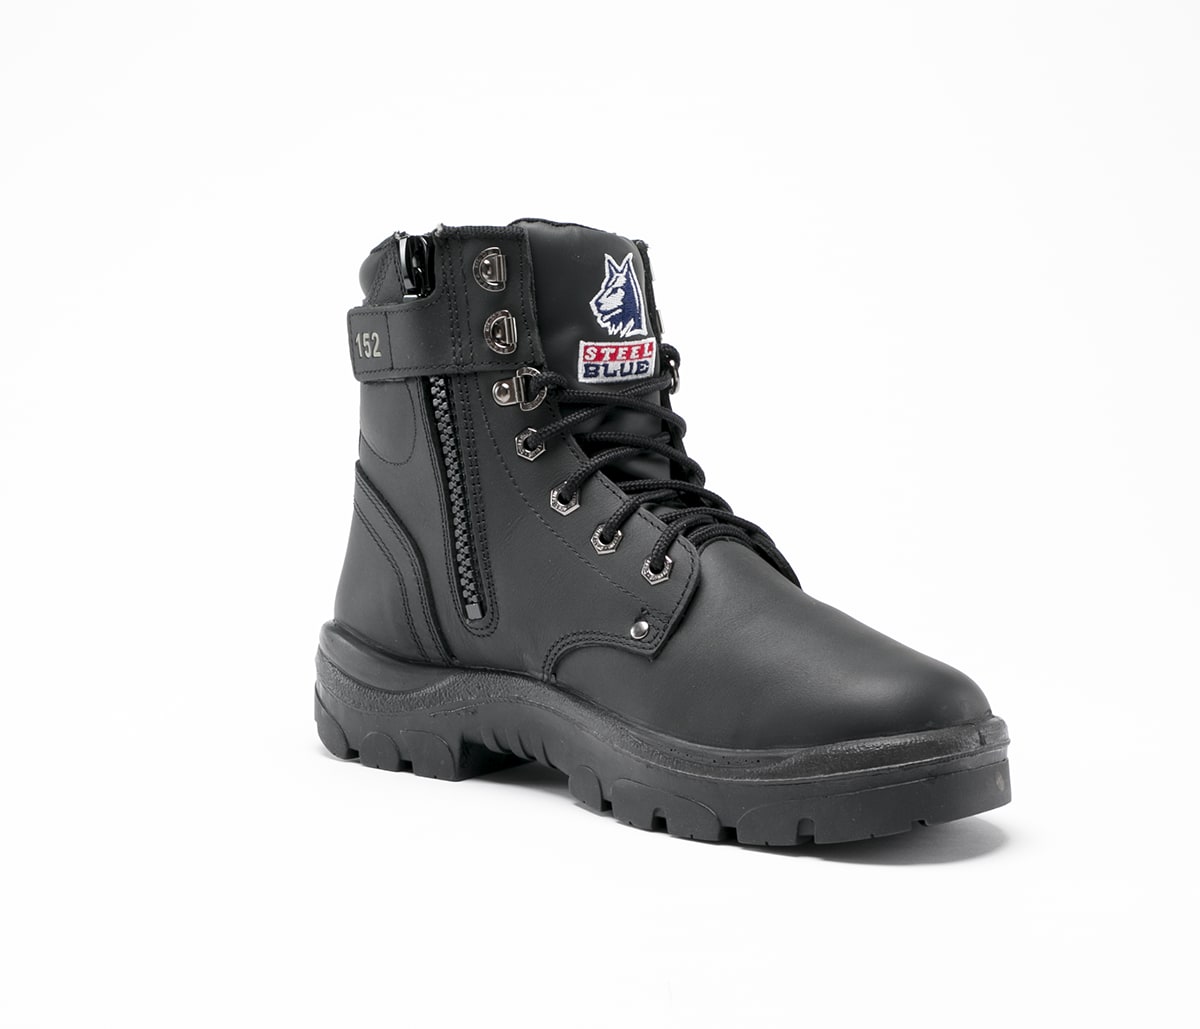 where can i buy steel cap boots